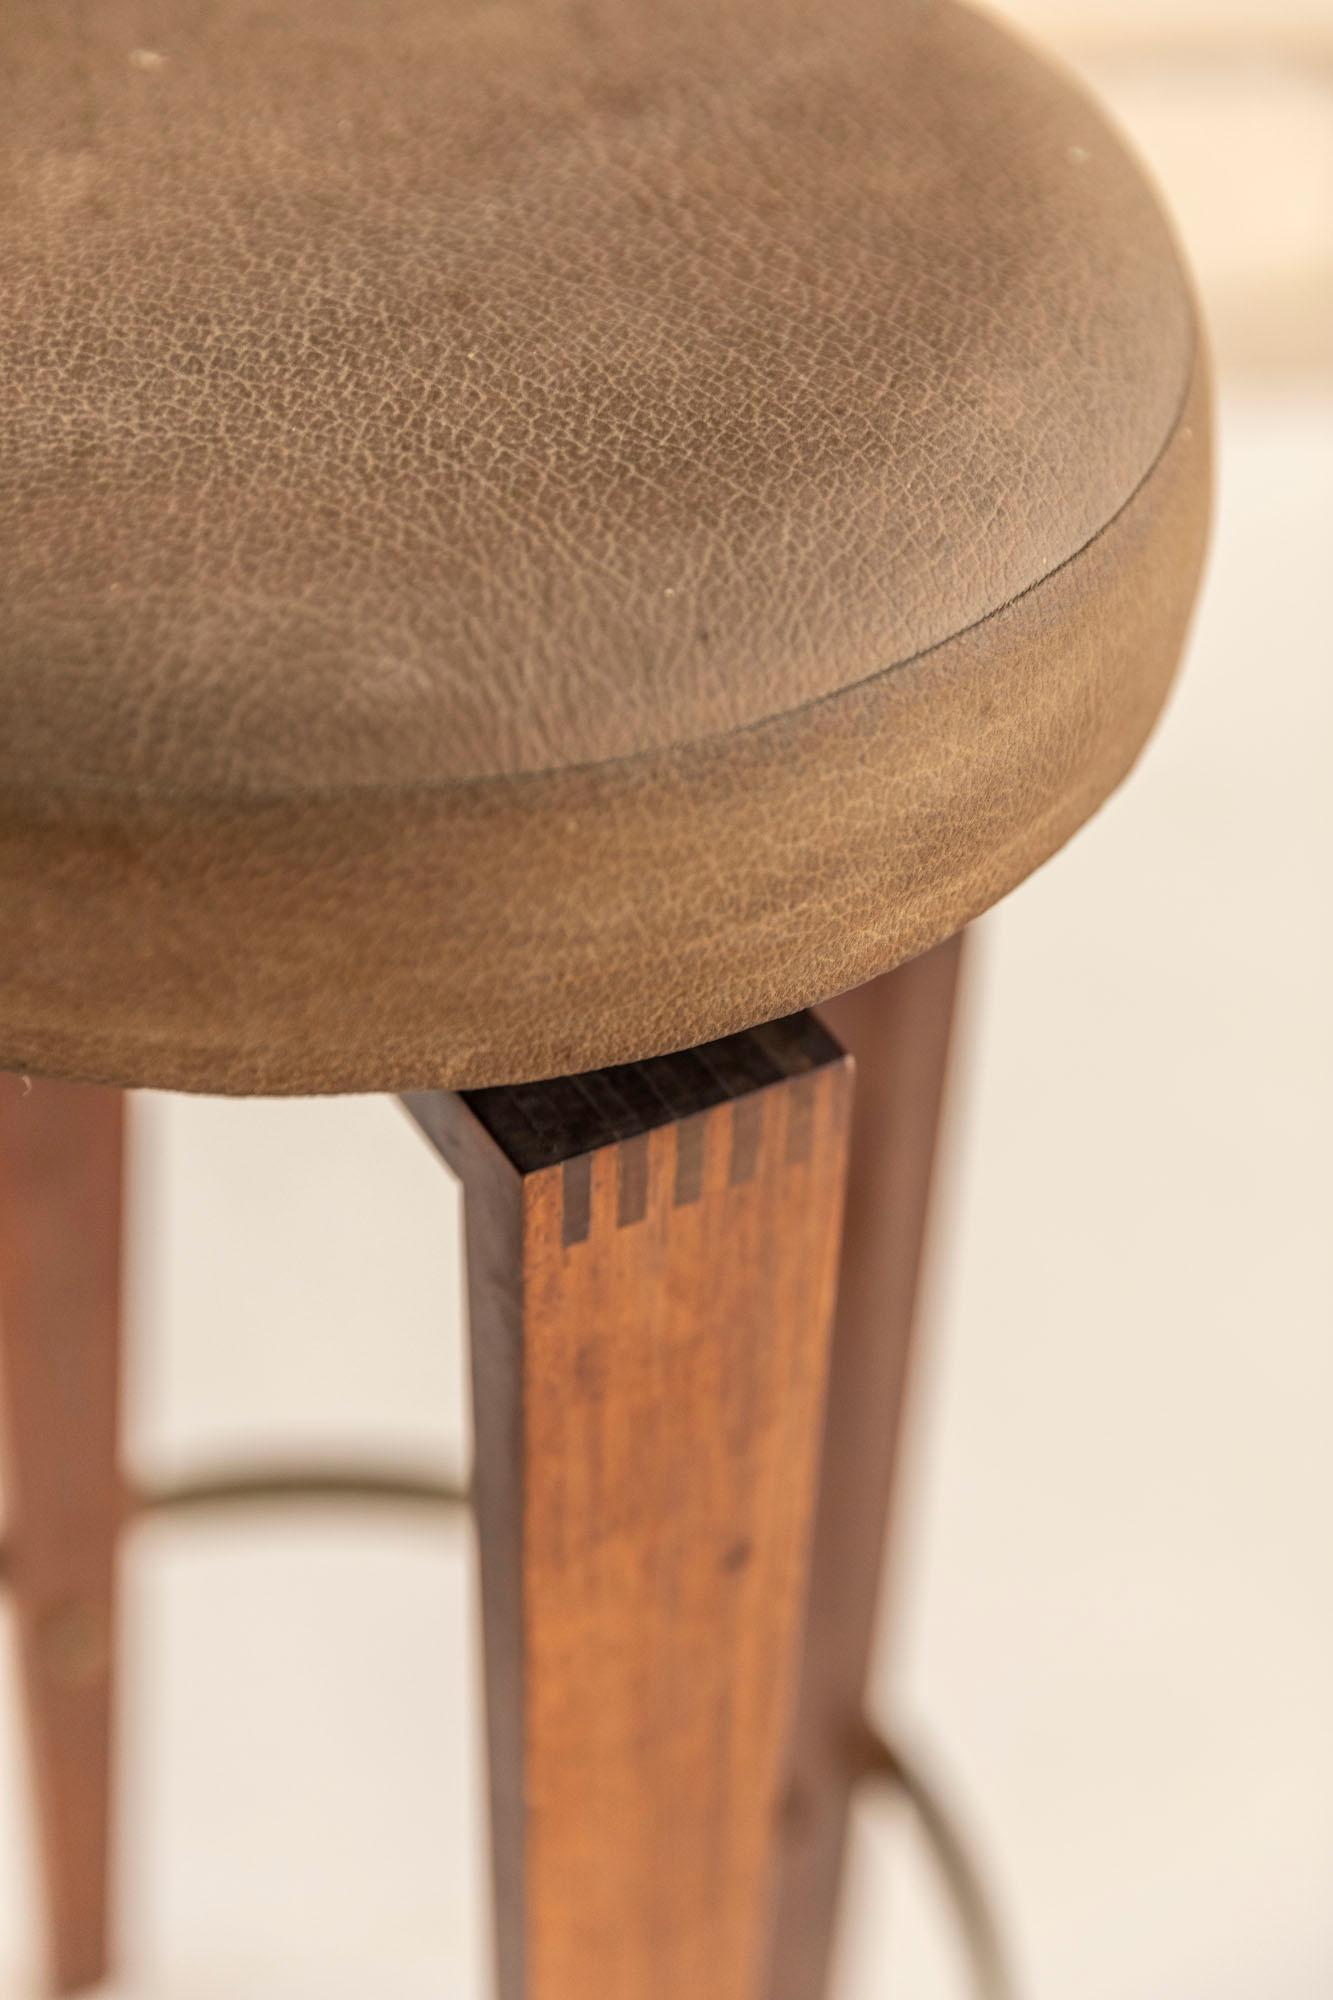 Wood and Leather Stool Attributed to Cassina In Excellent Condition For Sale In Piacenza, Italy